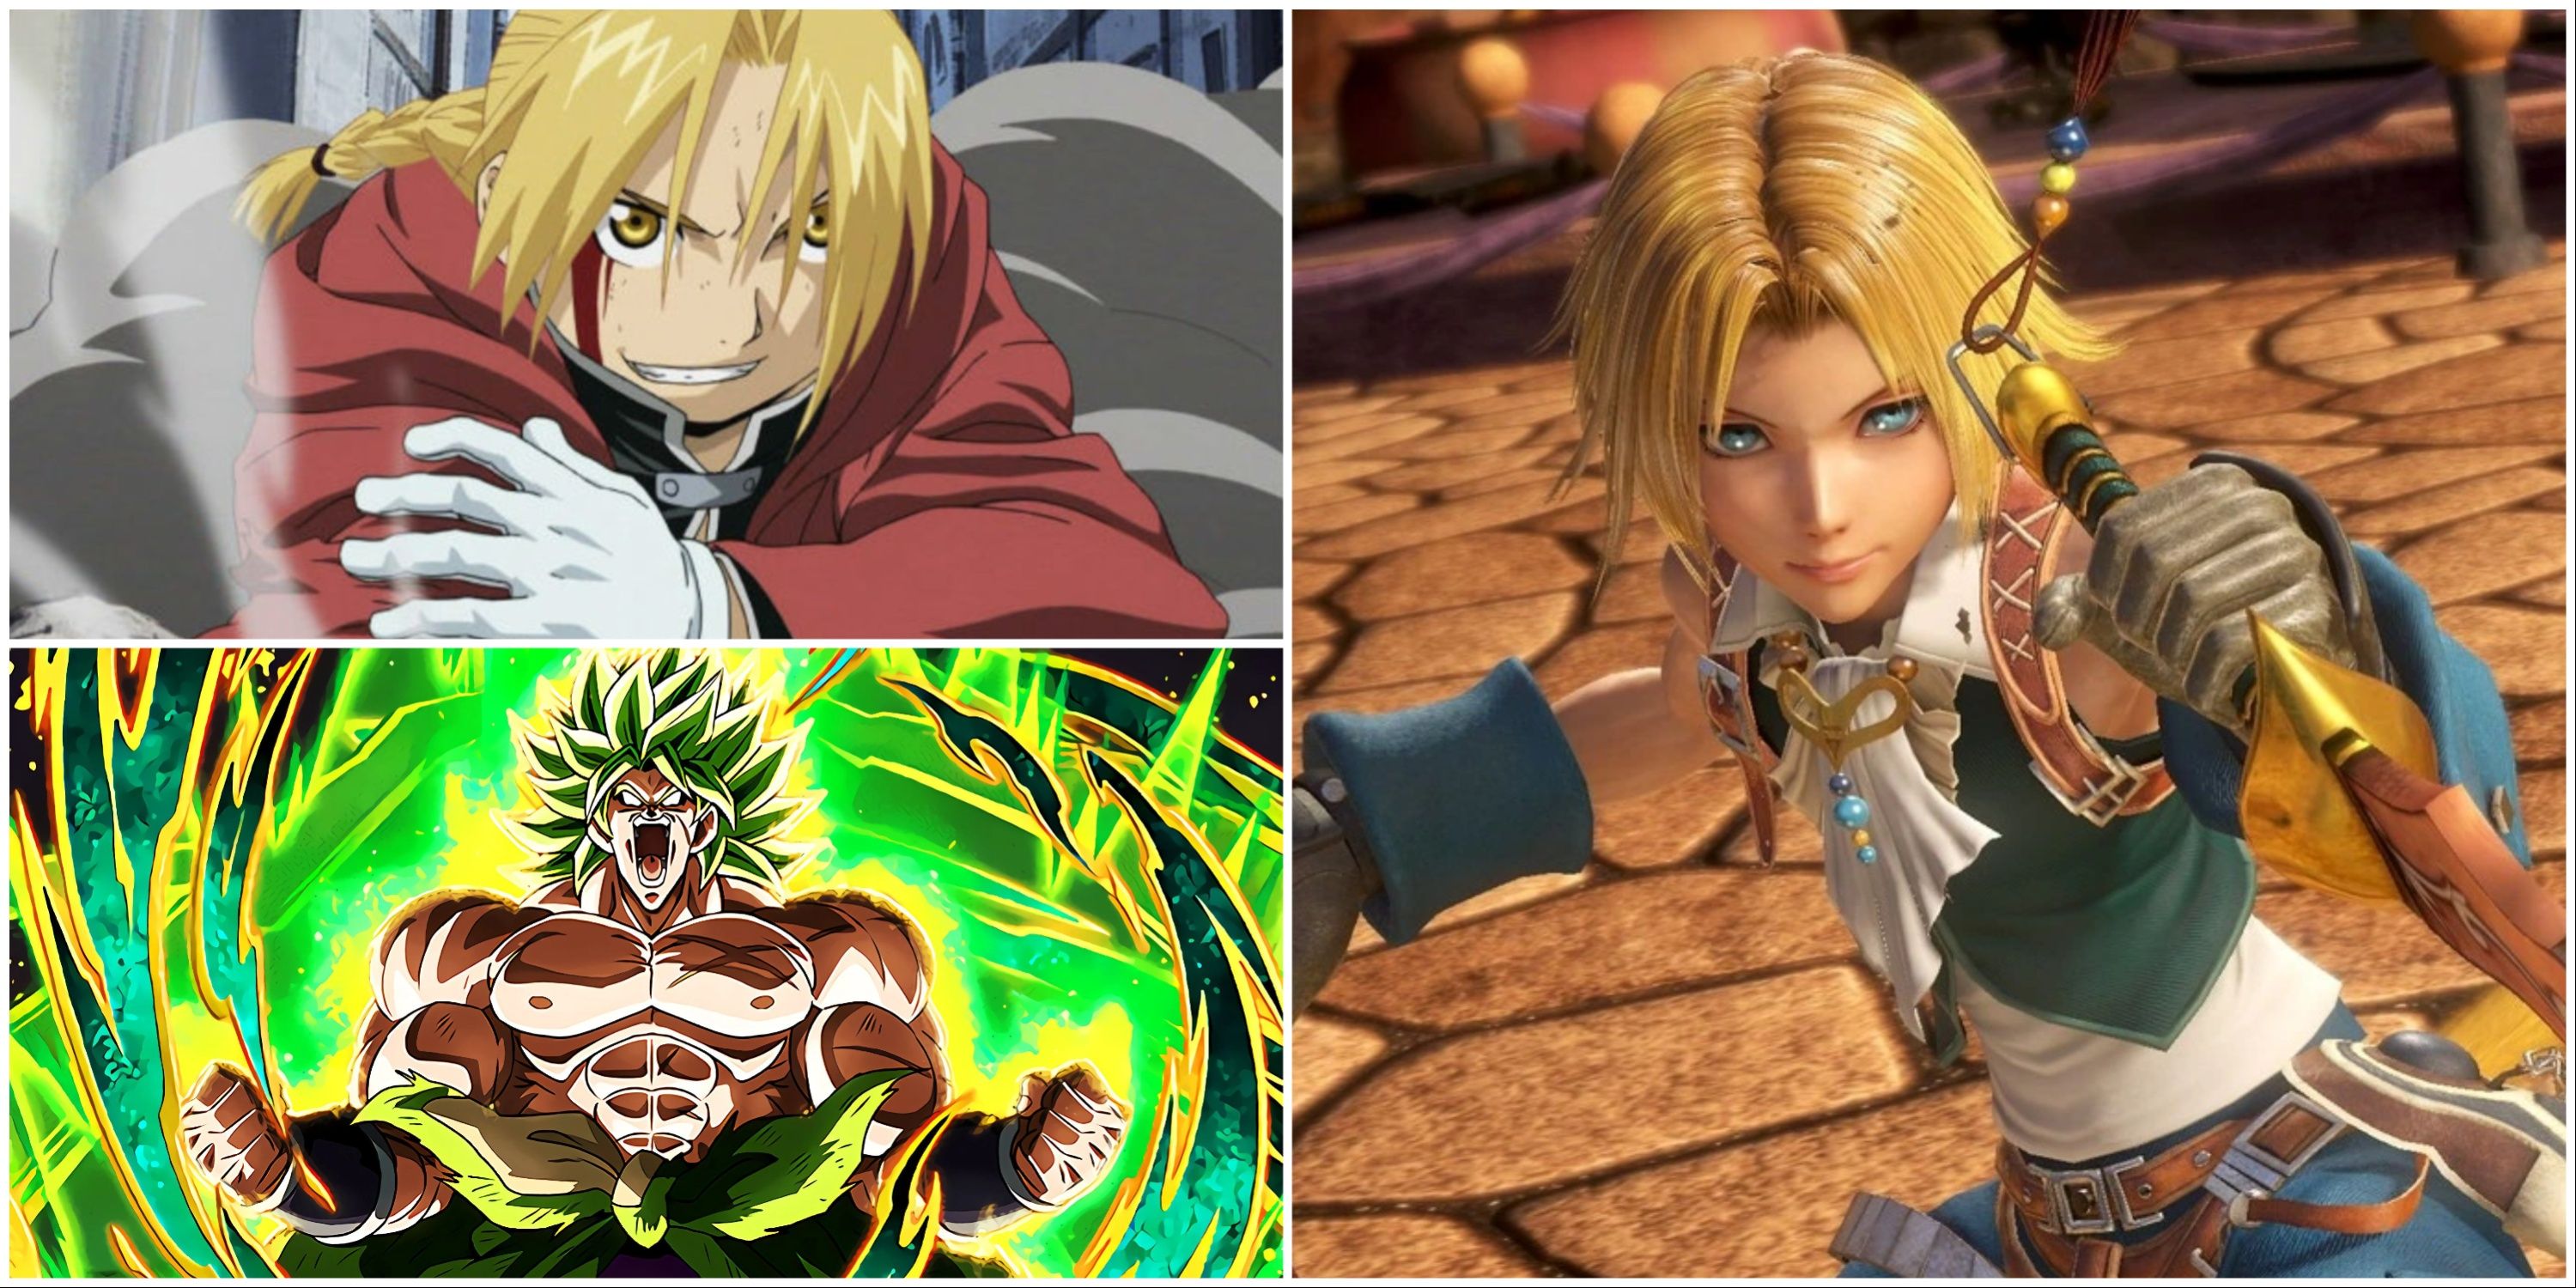 Edward Elric in Full Metal Alchemist, Broly in Dragon Ball Super: Broly, and Zidane in Final Fantasy 9